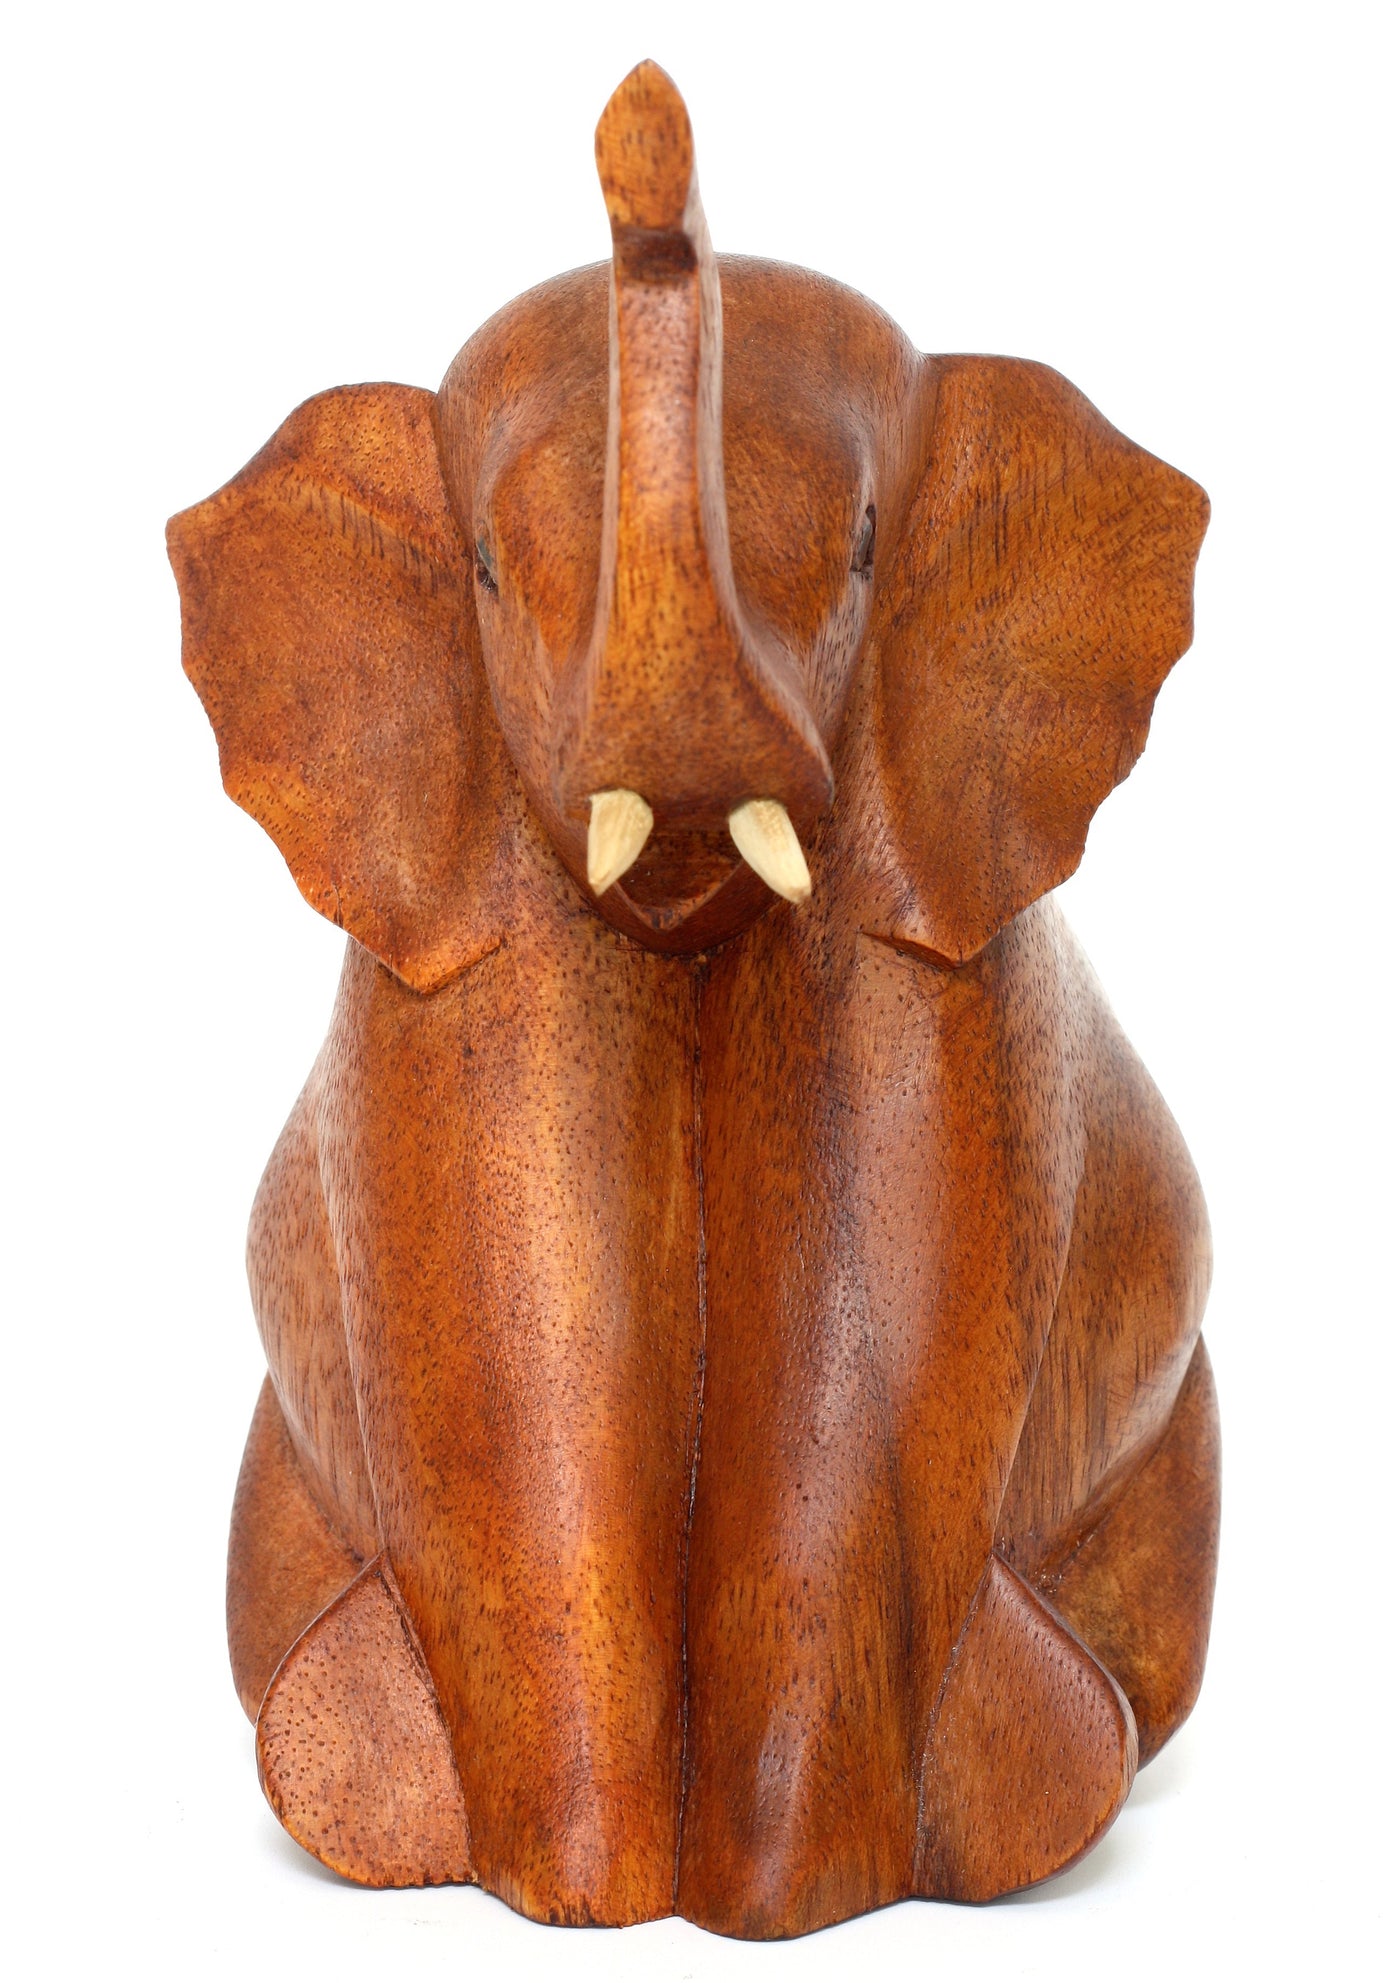 Wooden Hand Carved Sitting Elephant Statue Figurine Sculpture Art Decorative Rustic Home Decor Accent Handmade Handcrafted Decoration Wood